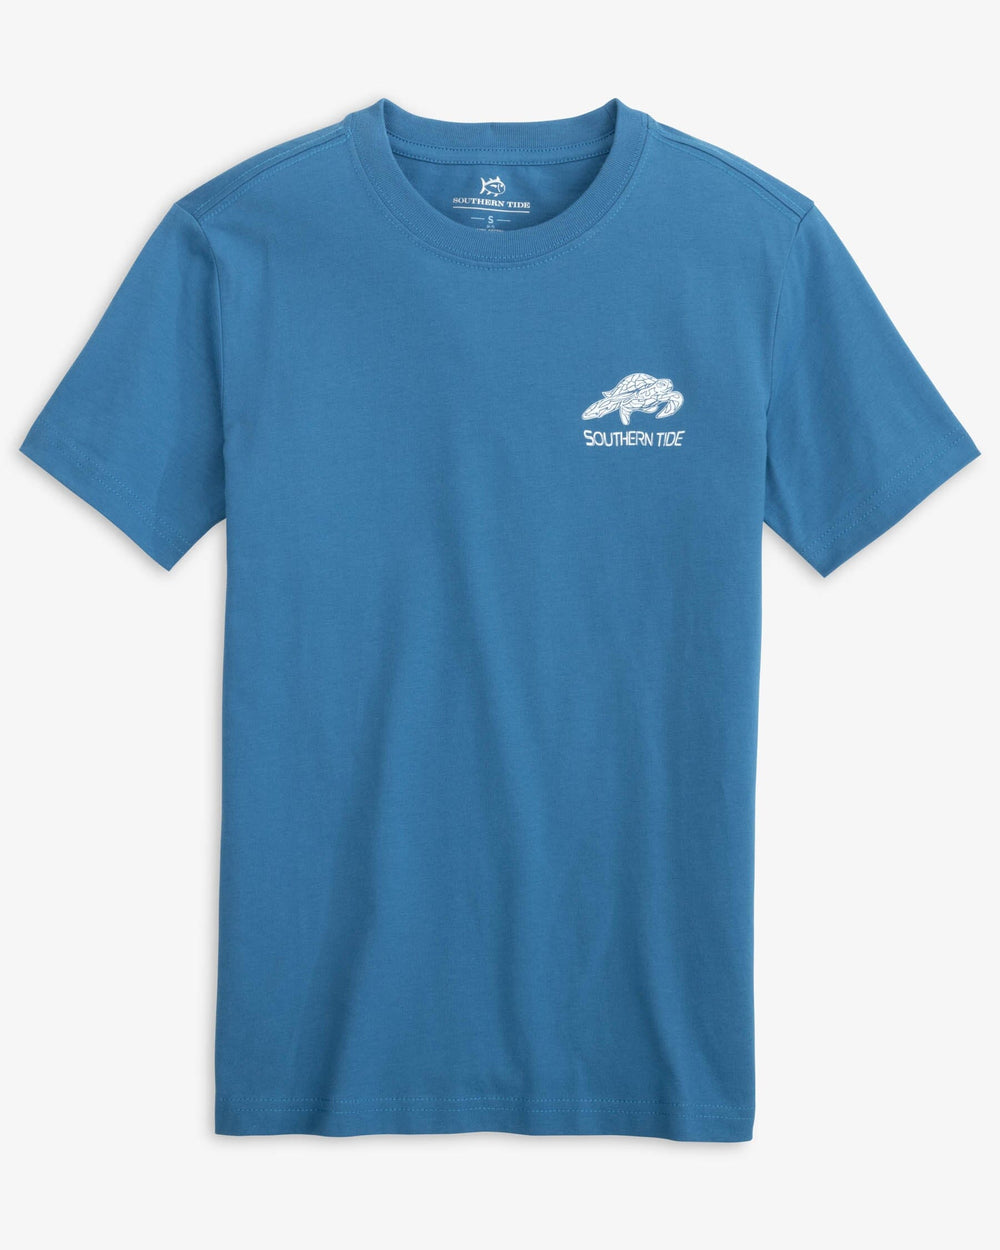 The front view of the Southern Tide Kids Swim Free T-shirt by Southern Tide - Atlantic Blue